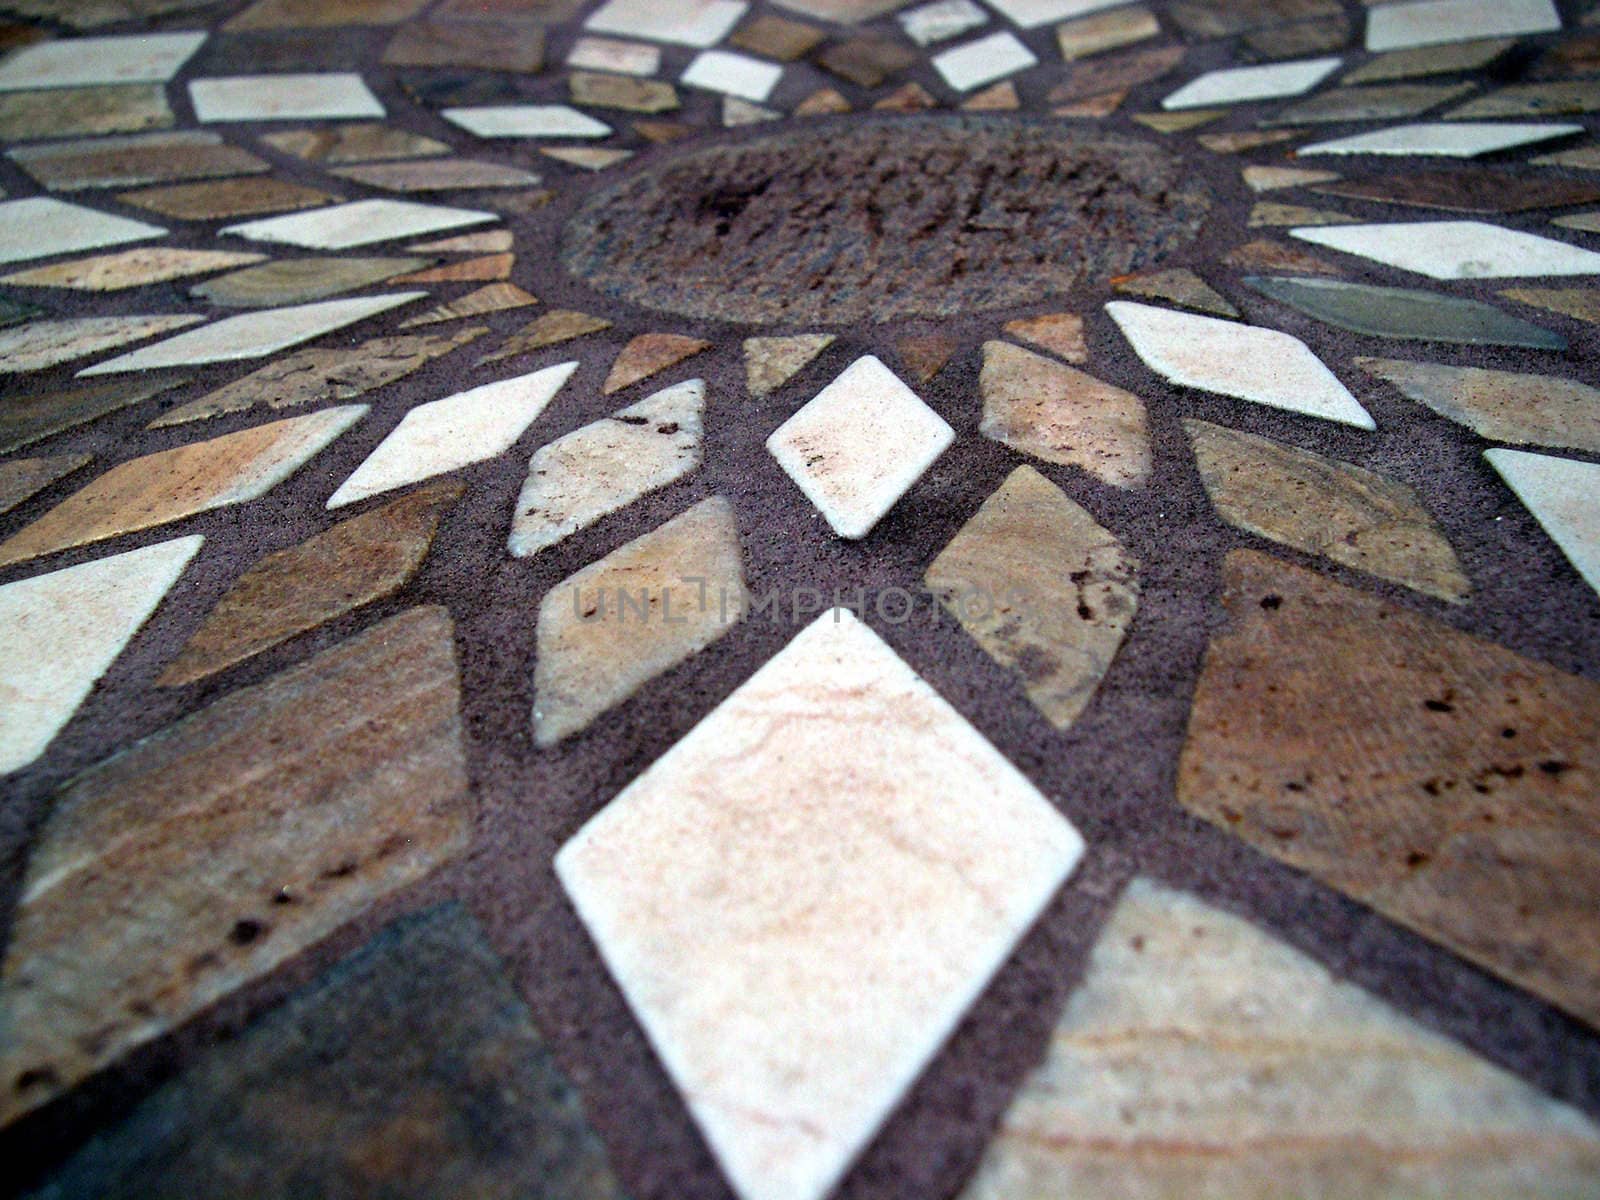 tiles arranged into a mosaic to form a table top